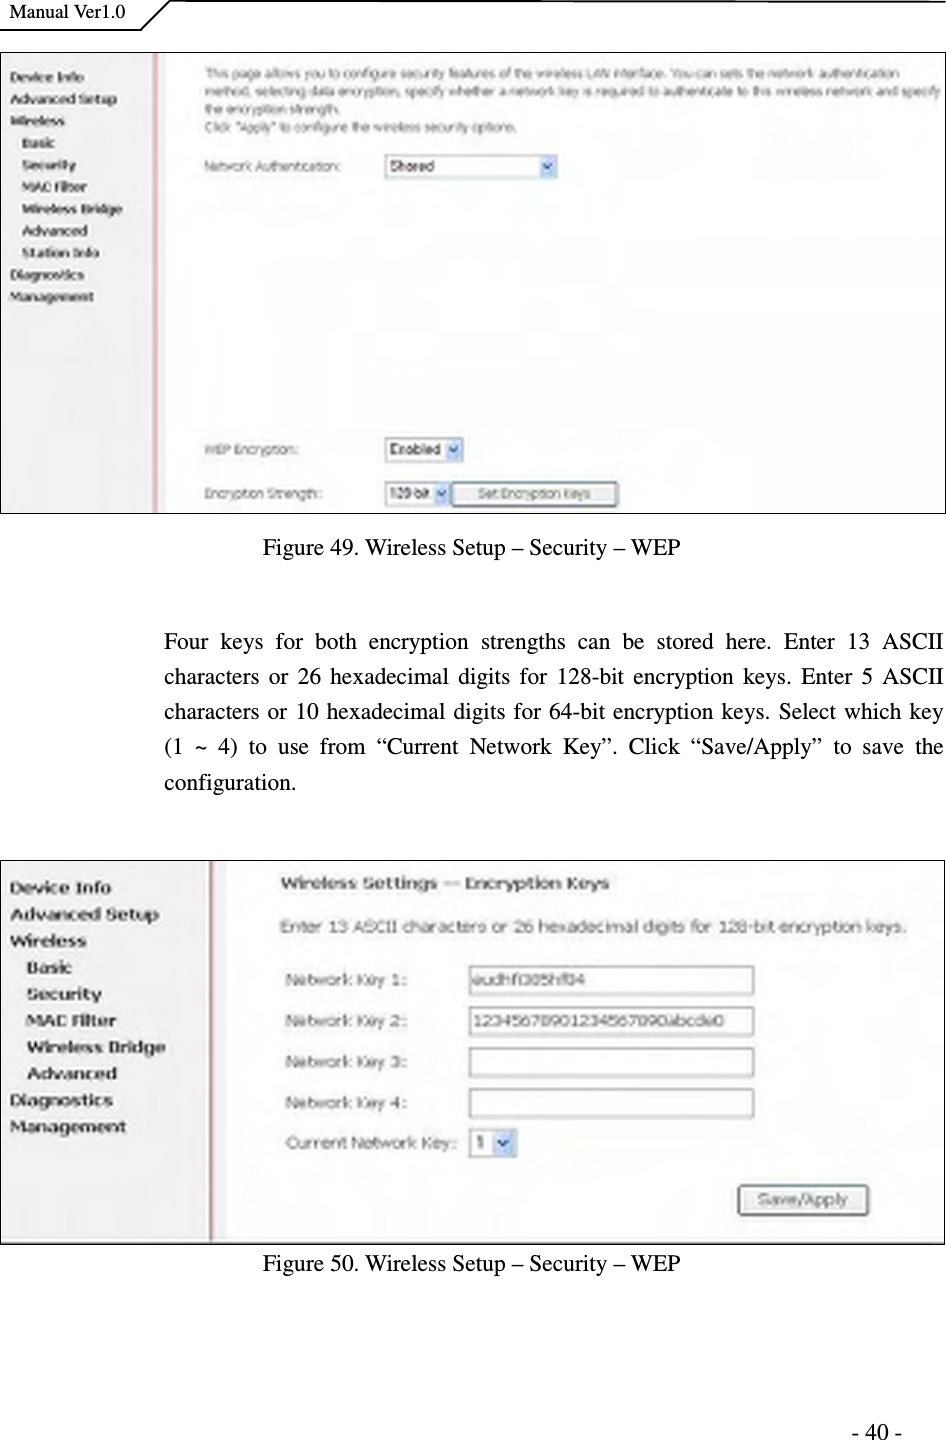    Manual Ver1.0                                                                      - 40 - Figure 49. Wireless Setup – Security – WEP  Four  keys  for  both  encryption  strengths  can  be  stored  here.  Enter  13  ASCII characters or  26  hexadecimal digits  for 128-bit encryption  keys.  Enter 5 ASCII characters or 10 hexadecimal digits for 64-bit encryption keys. Select which key (1  ~  4)  to  use  from  “Current  Network  Key”.  Click  “Save/Apply”  to  save  the configuration.    Figure 50. Wireless Setup – Security – WEP   